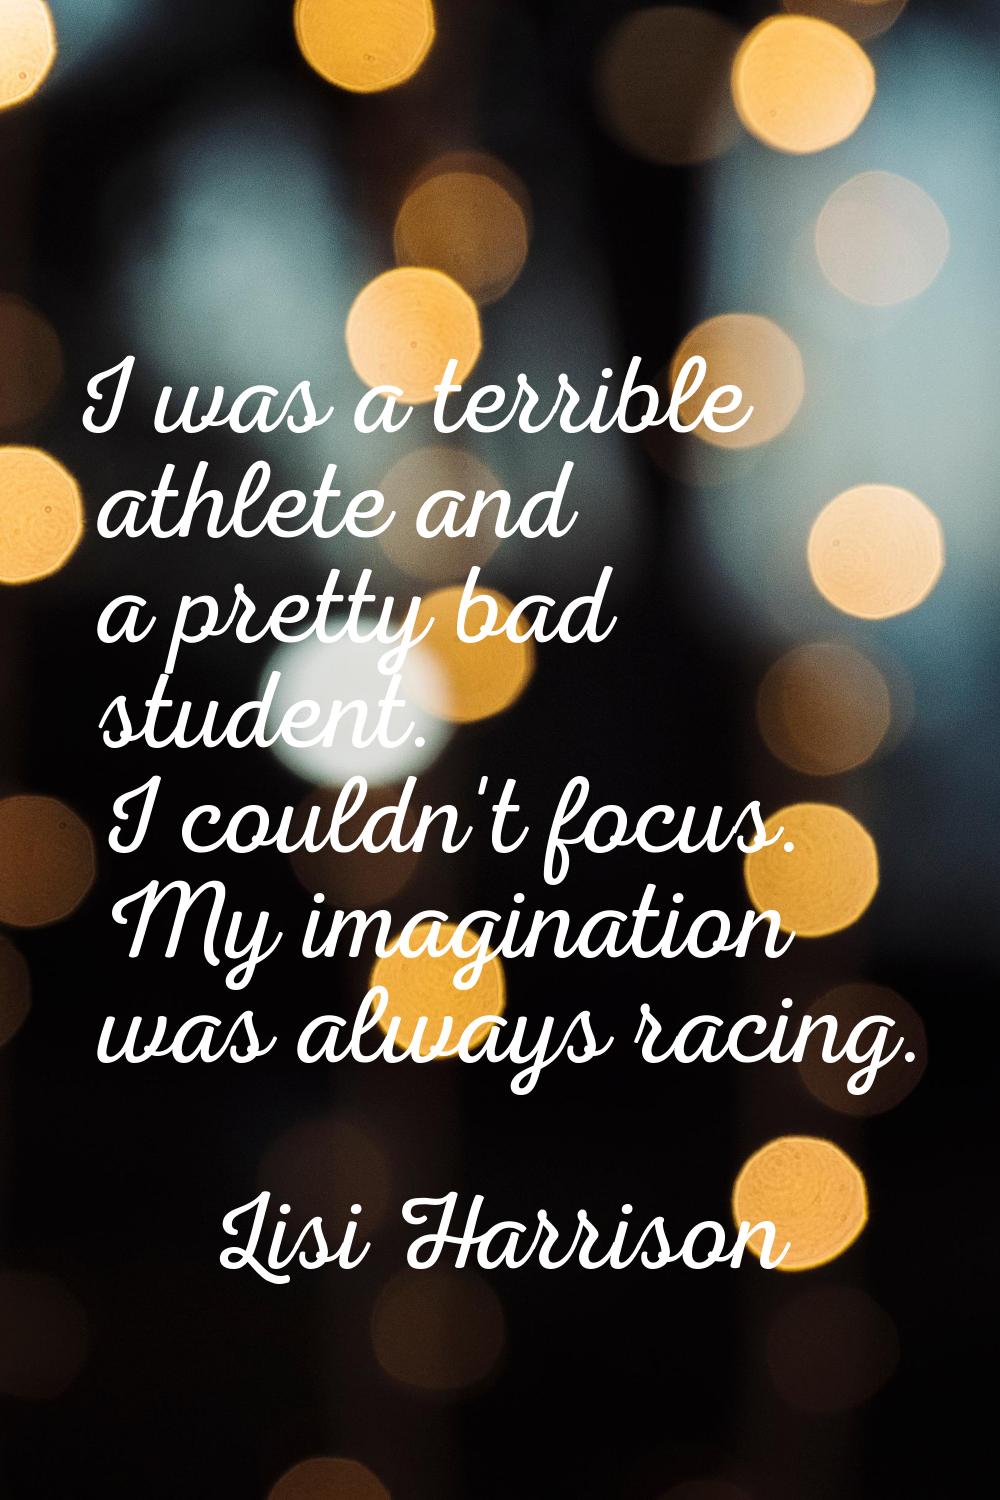 I was a terrible athlete and a pretty bad student. I couldn't focus. My imagination was always raci